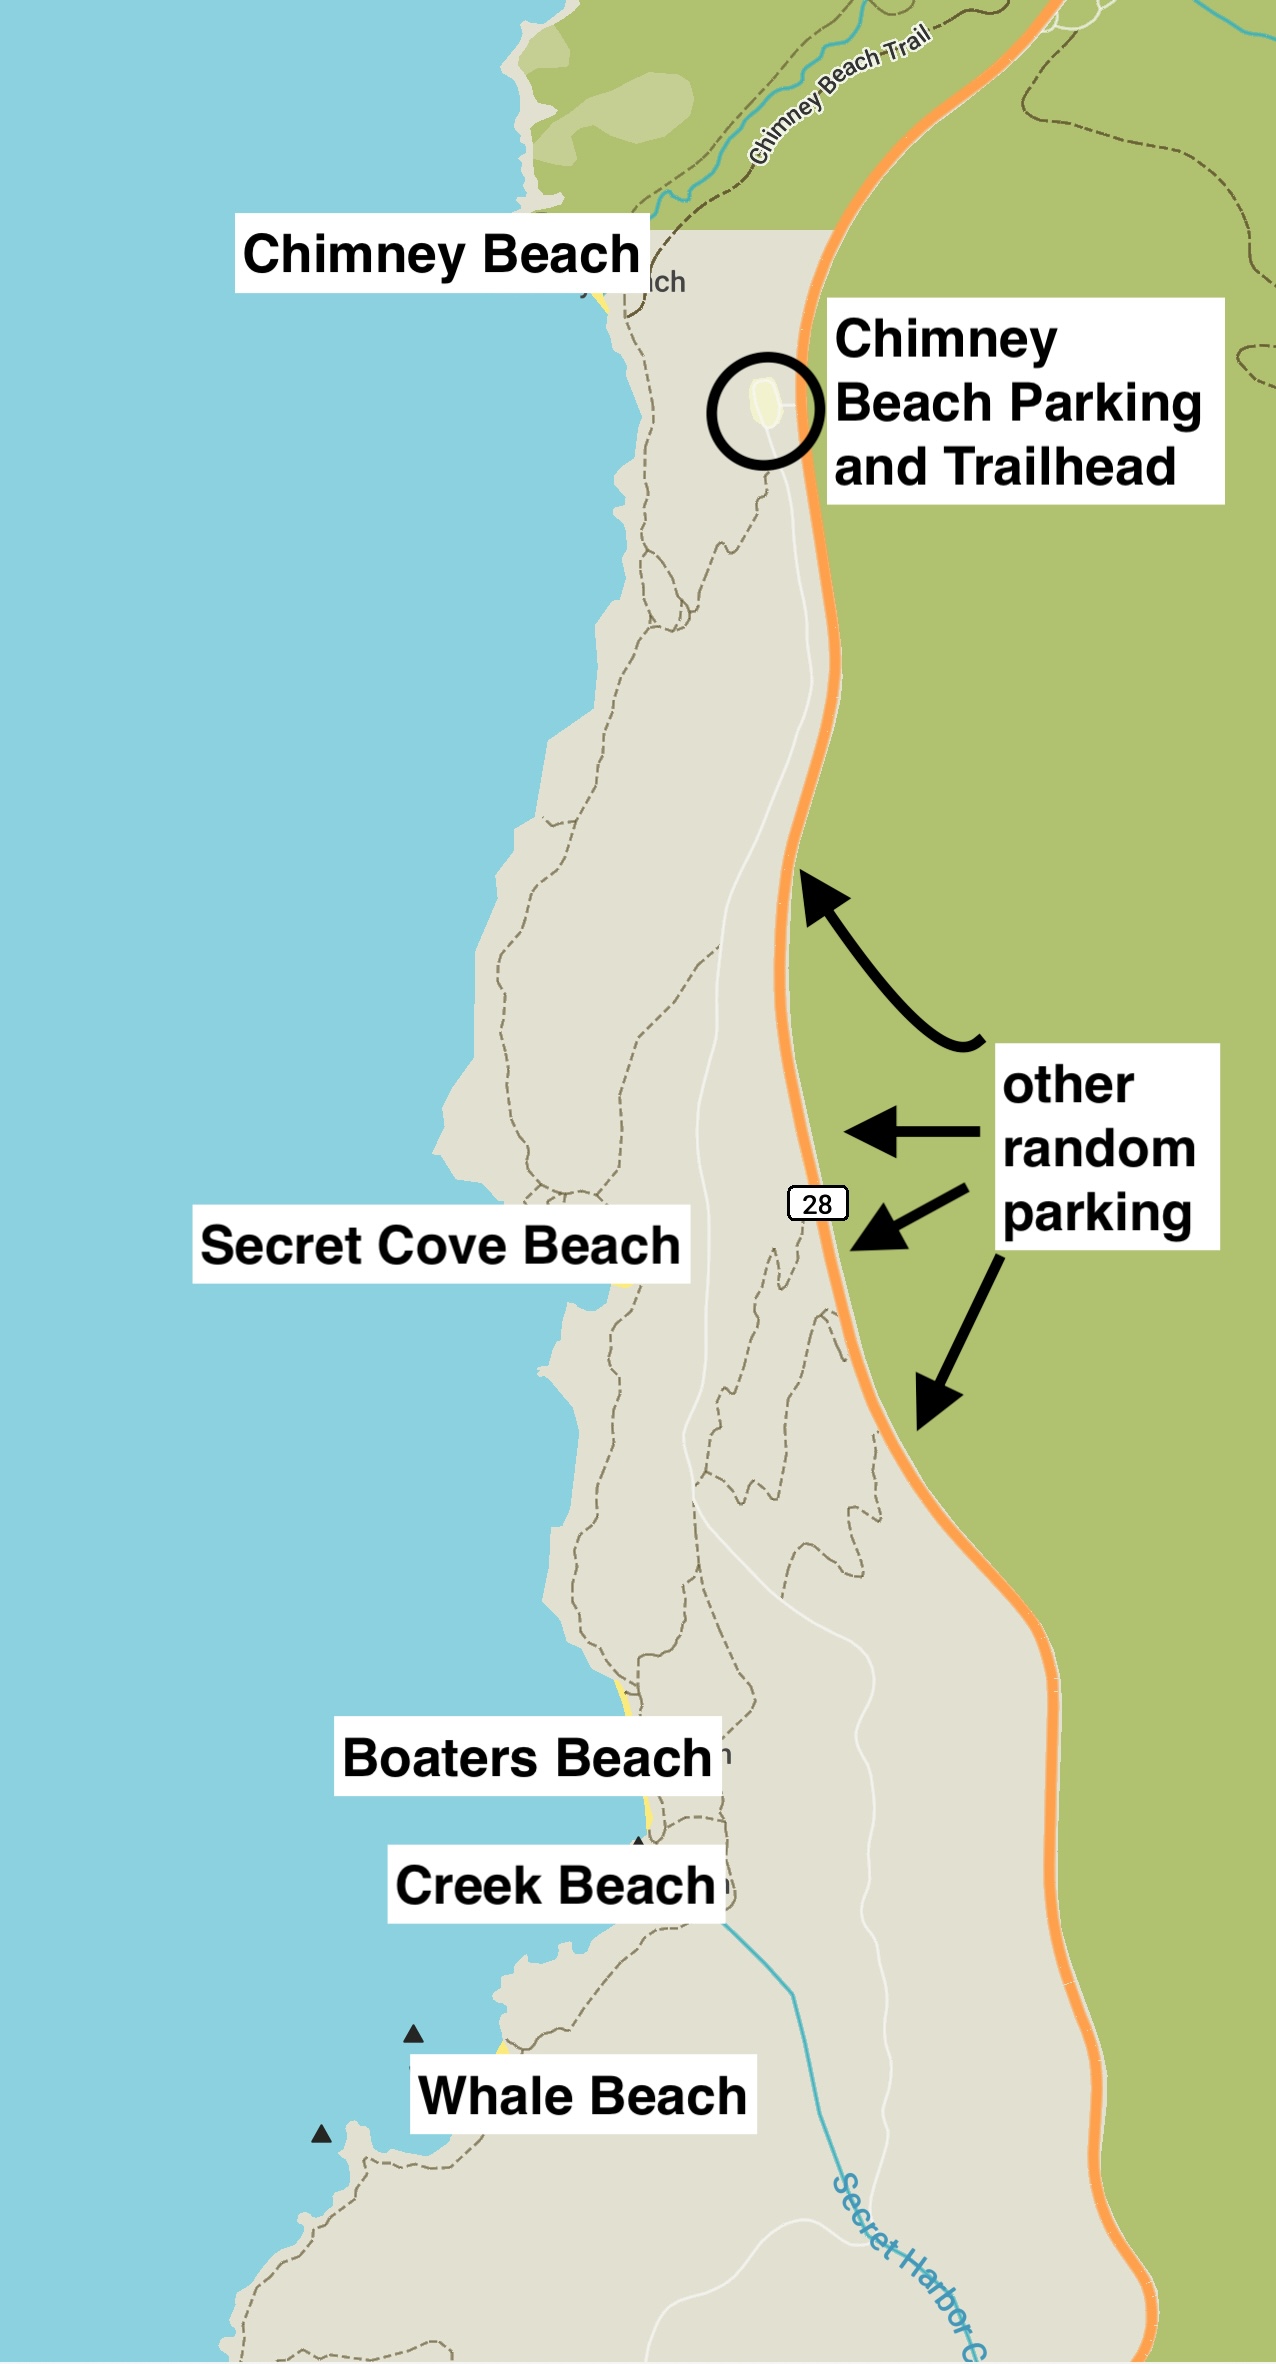 A map of Secret Cove Beach and the surrounding areas.